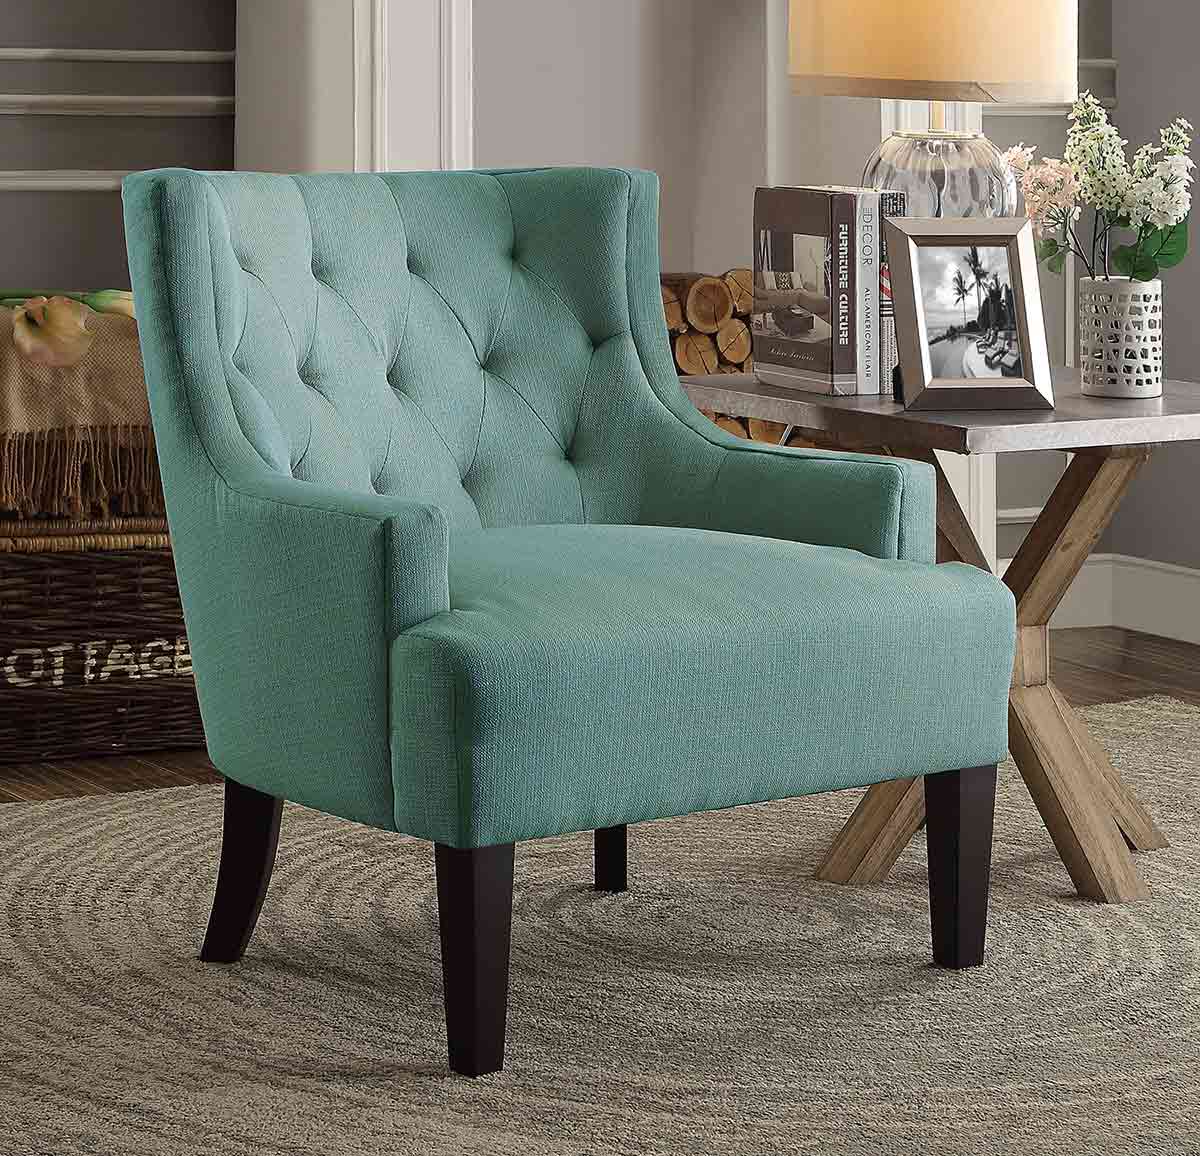 Homelegance Dulce Accent Chair - Teal